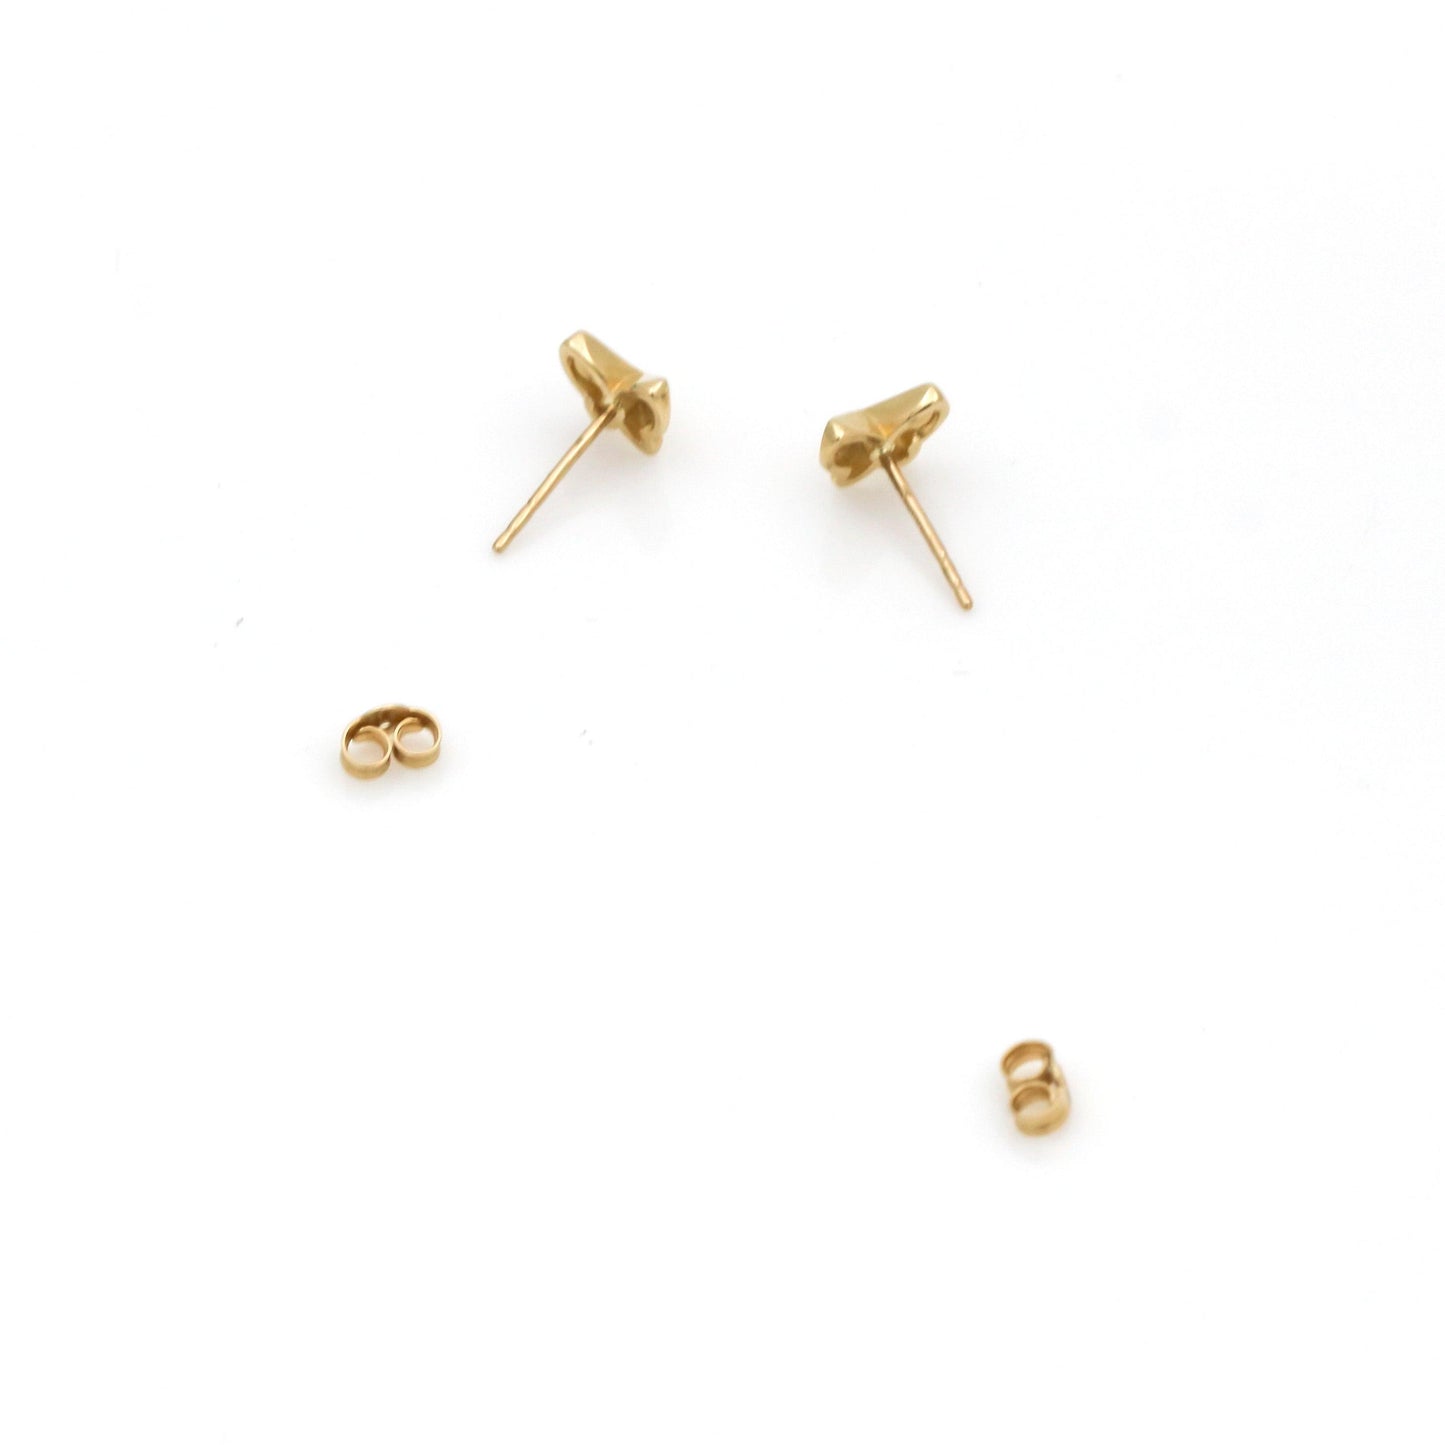 Butterfly Stud Earrings in 14k Yellow Gold for Young Girls and Teens - 31 Jewels Inc.